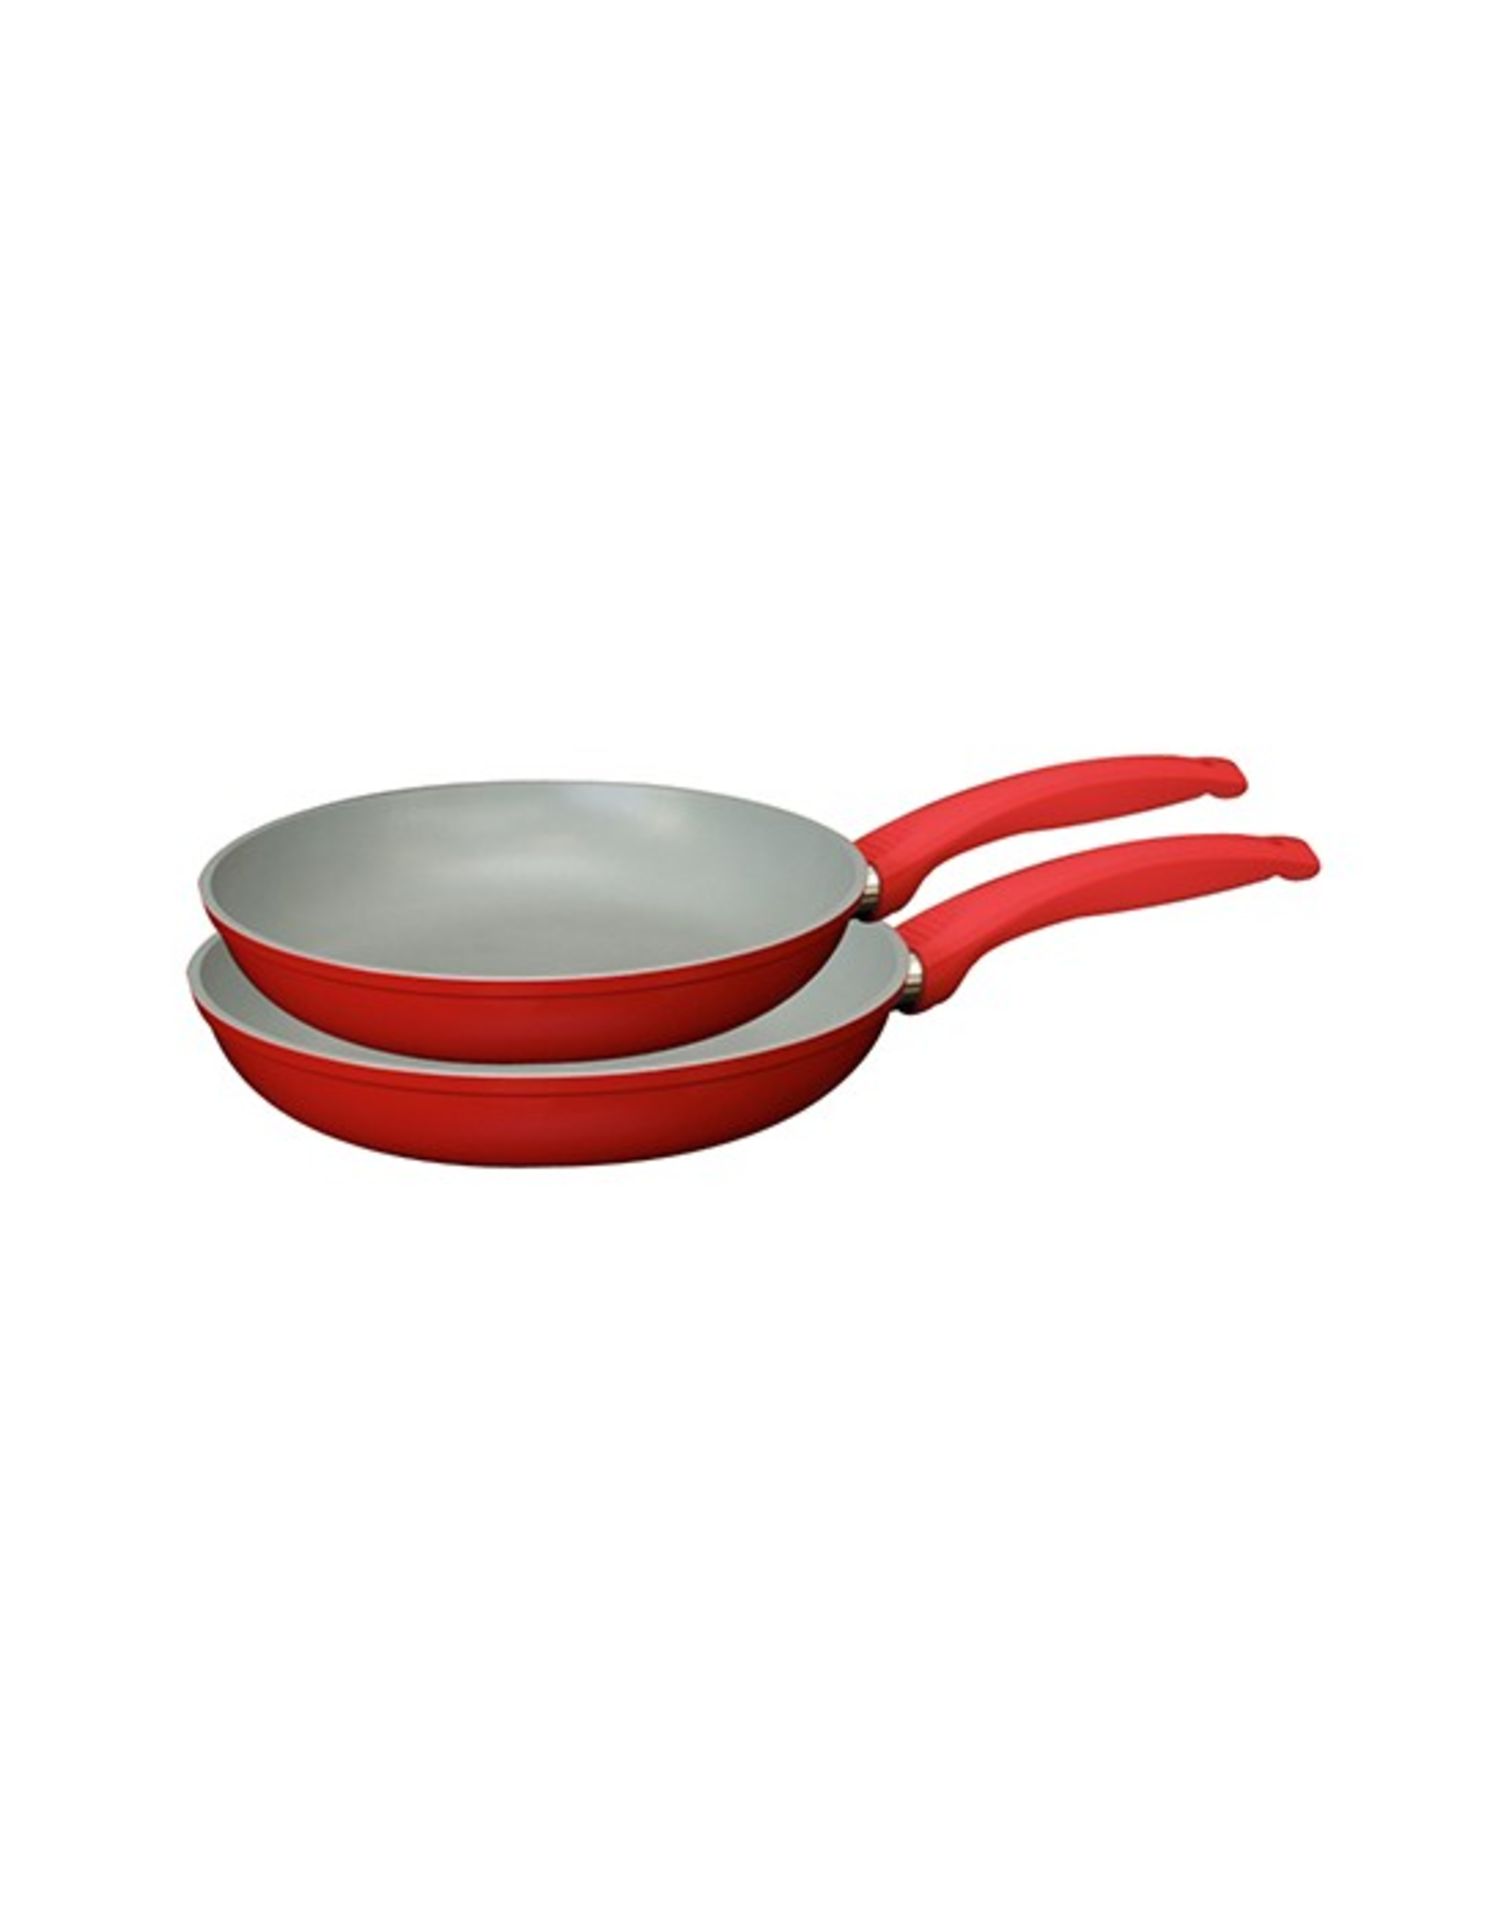 V Brand New Set Of Two Colour Changing Frying Pans (Red) Changes Colour At Optimum Cooking